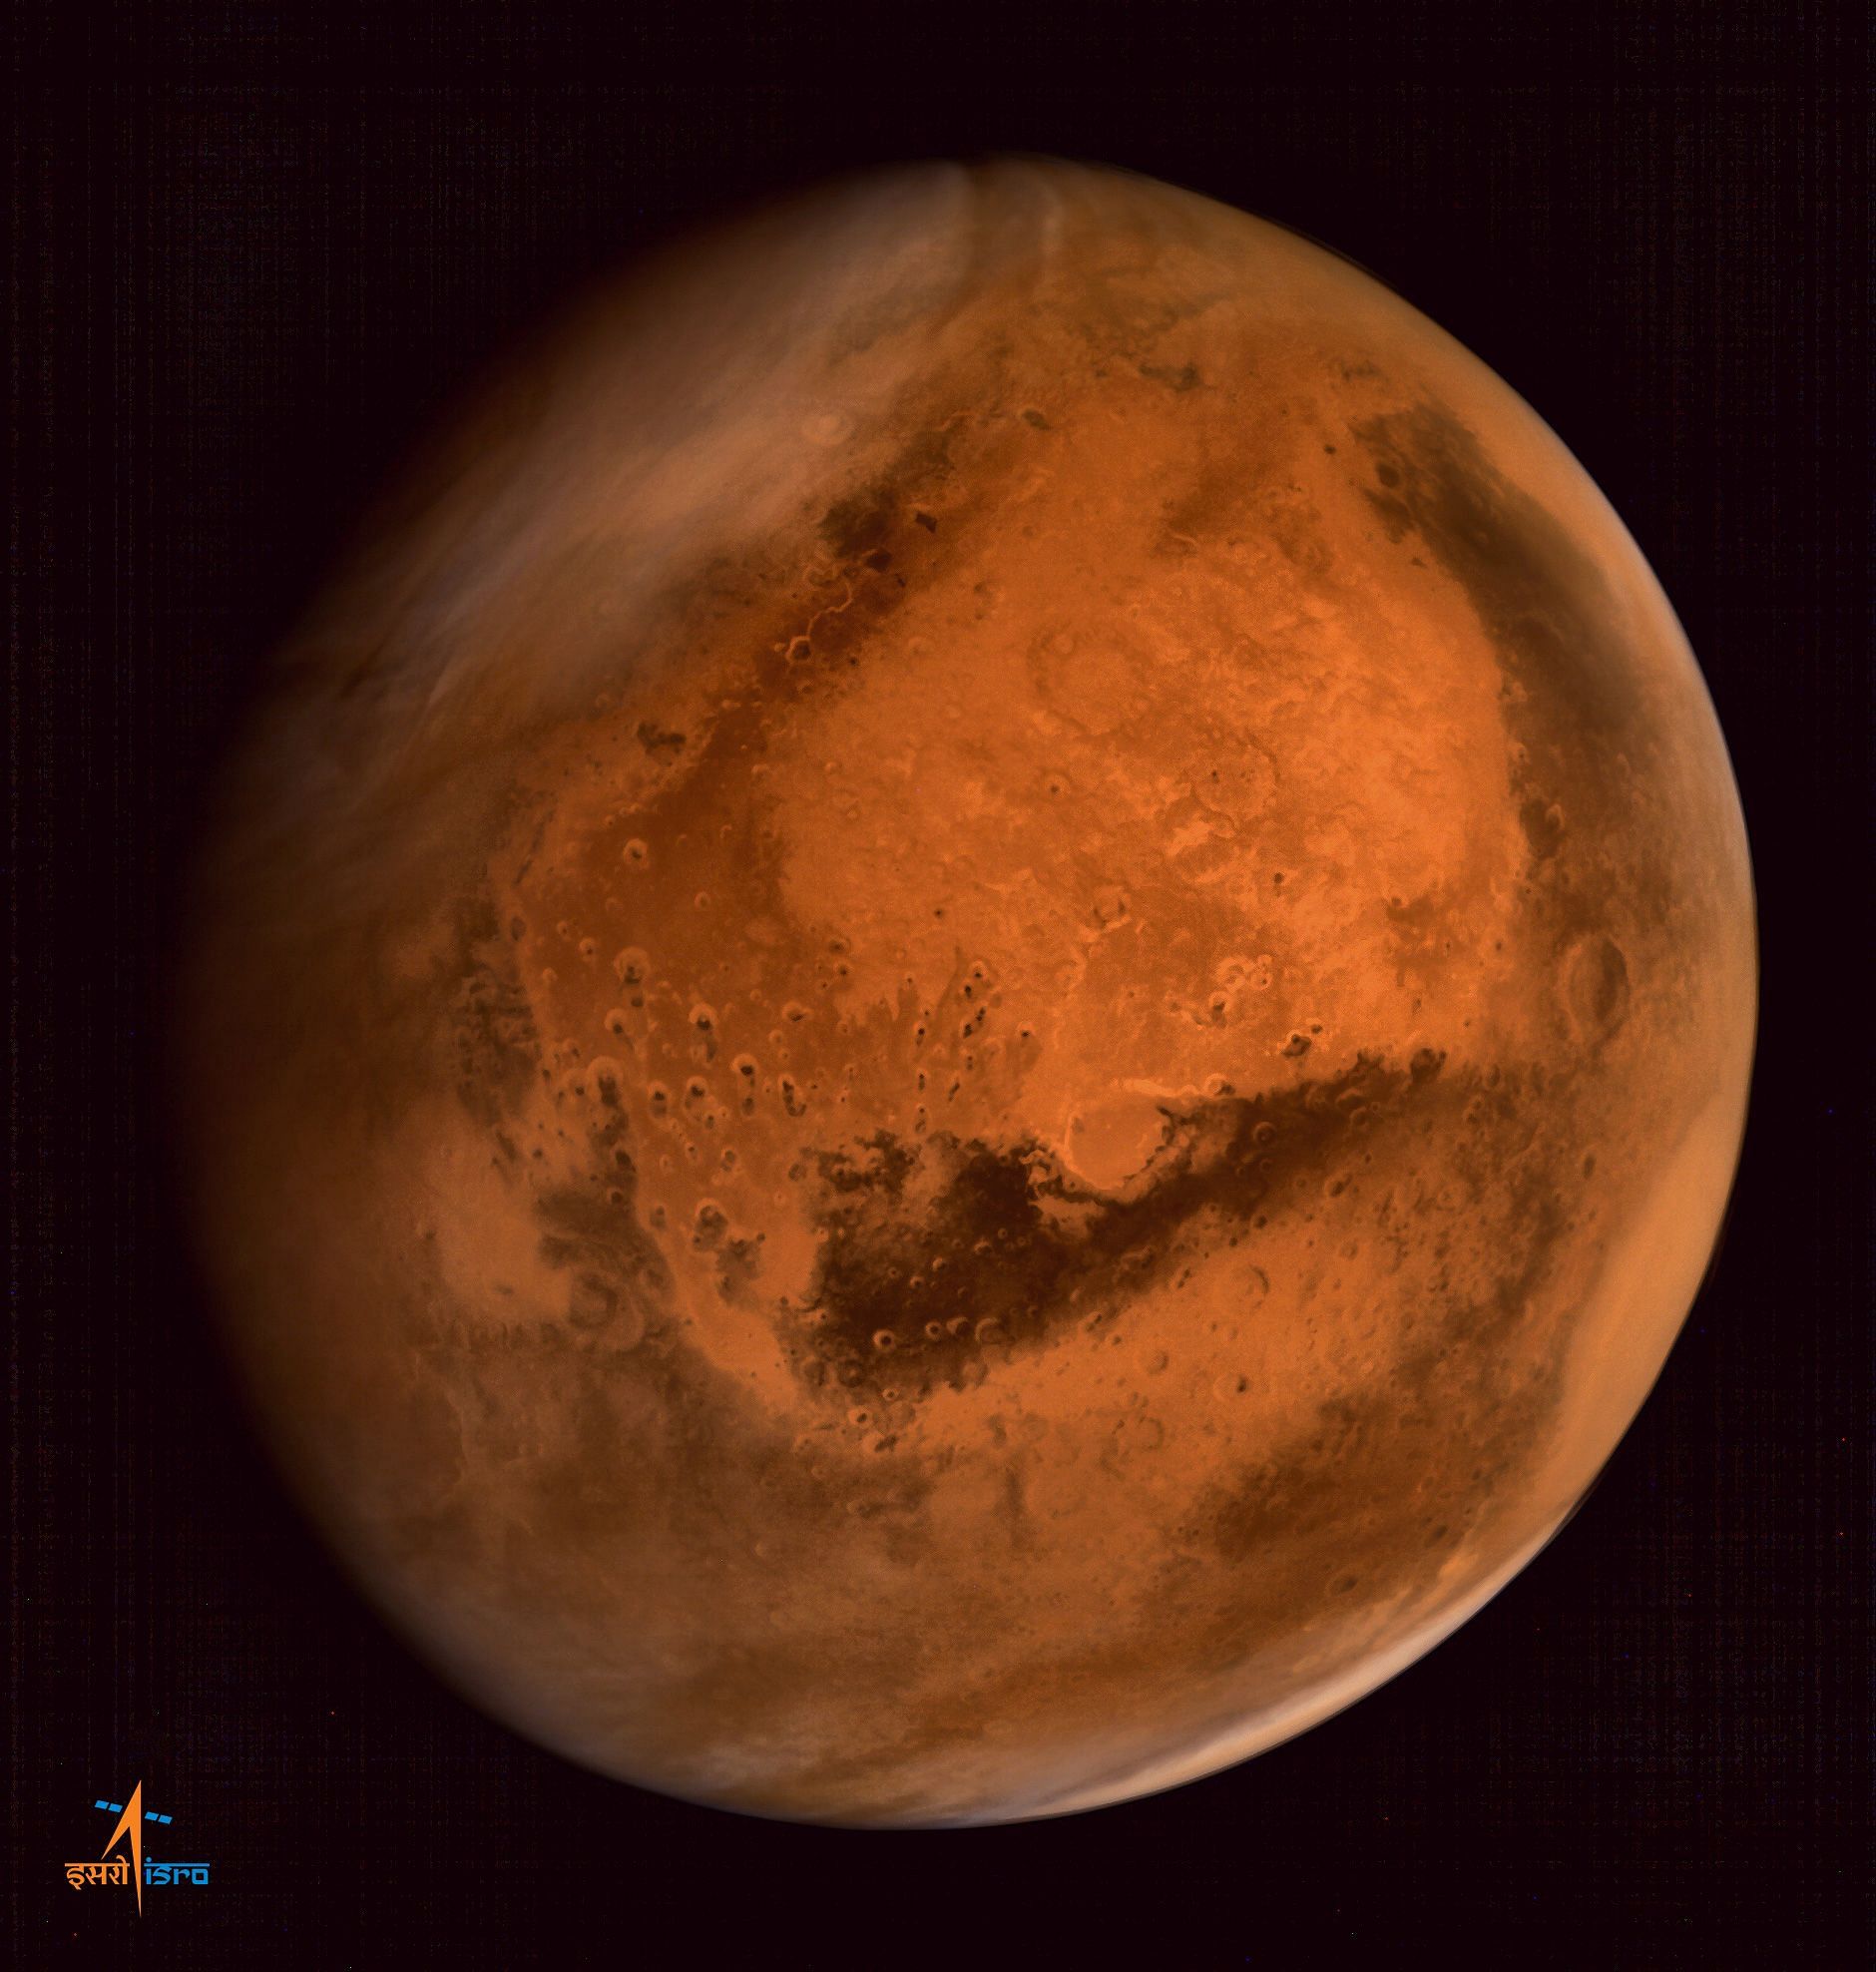 In this file photo taken on September 30, 2014 a handout photograph received from the Indian Space Research Organisation (ISRO) shows an image of the planet Mars taken by the ISRO Mars Orbiter Mission (MOM) spacecraft. Credit: AFP PHOTO/ ISRO